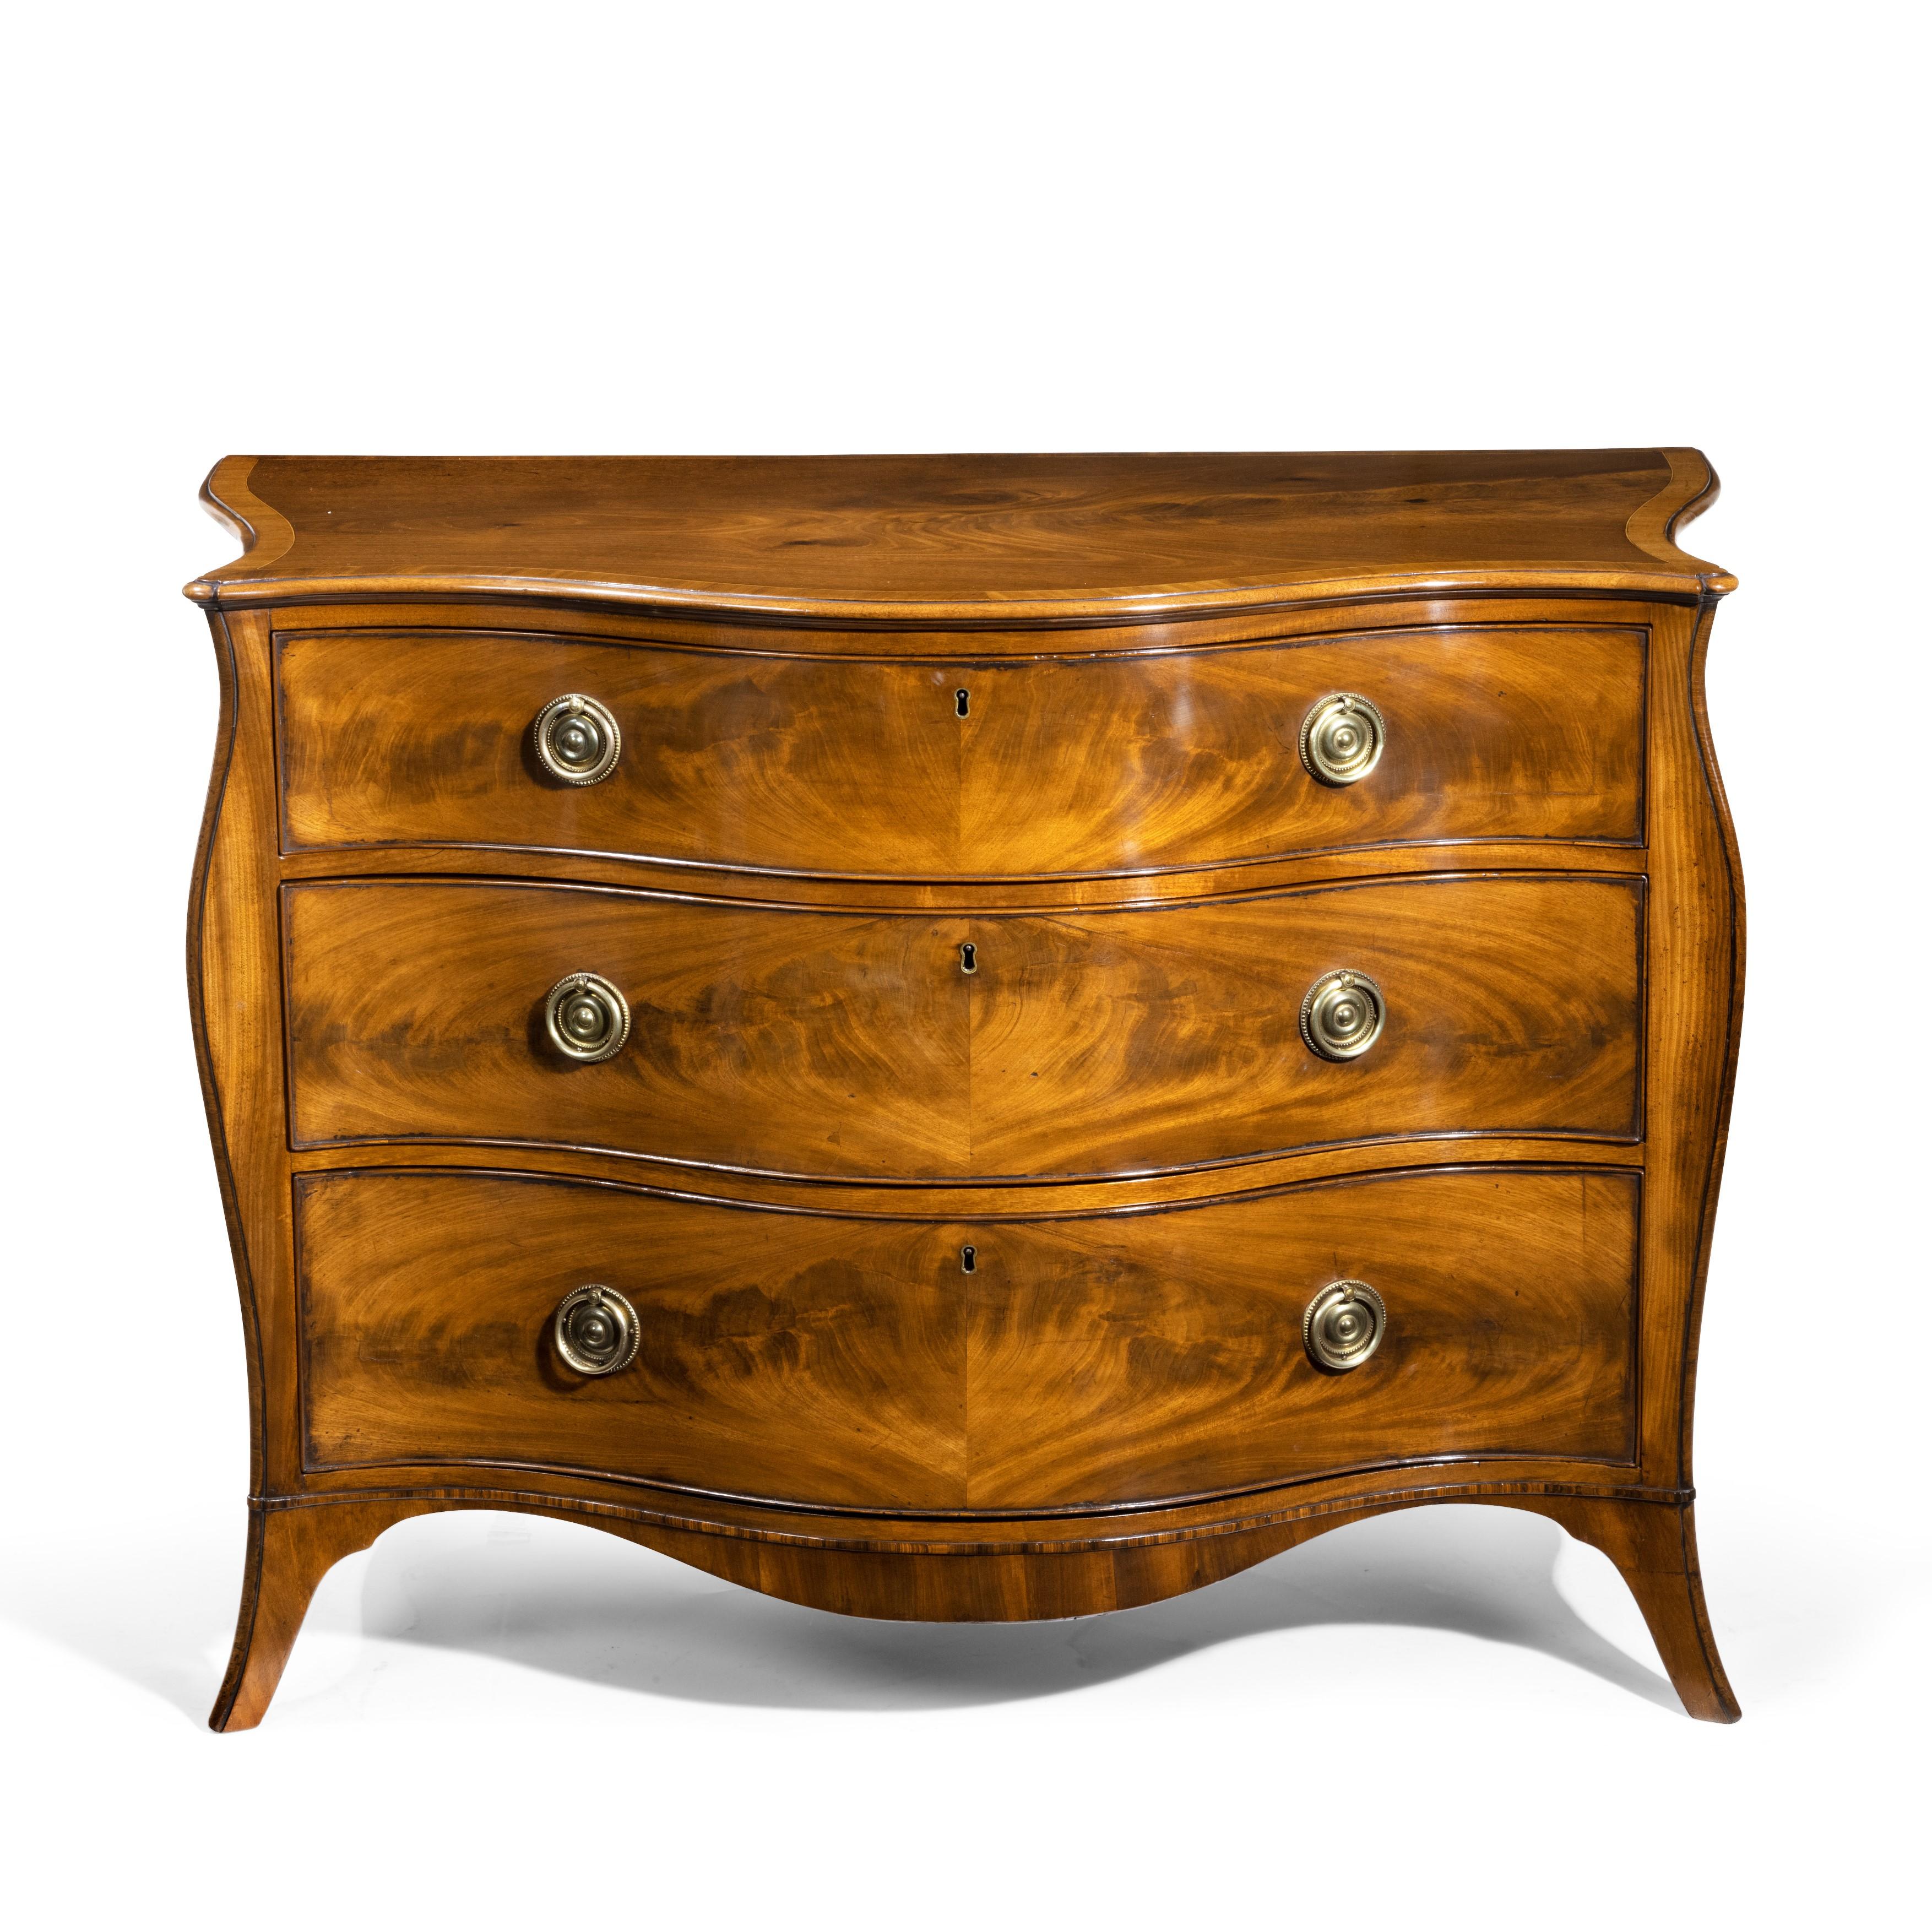 A fine George III figured mahogany serpentine commode attributed to Henry Hill of Marlborough, the serpentine top with a moulded edge above shaped sides and three graduated serpentine drawers fitted with the original gilt brass handles, bordered by